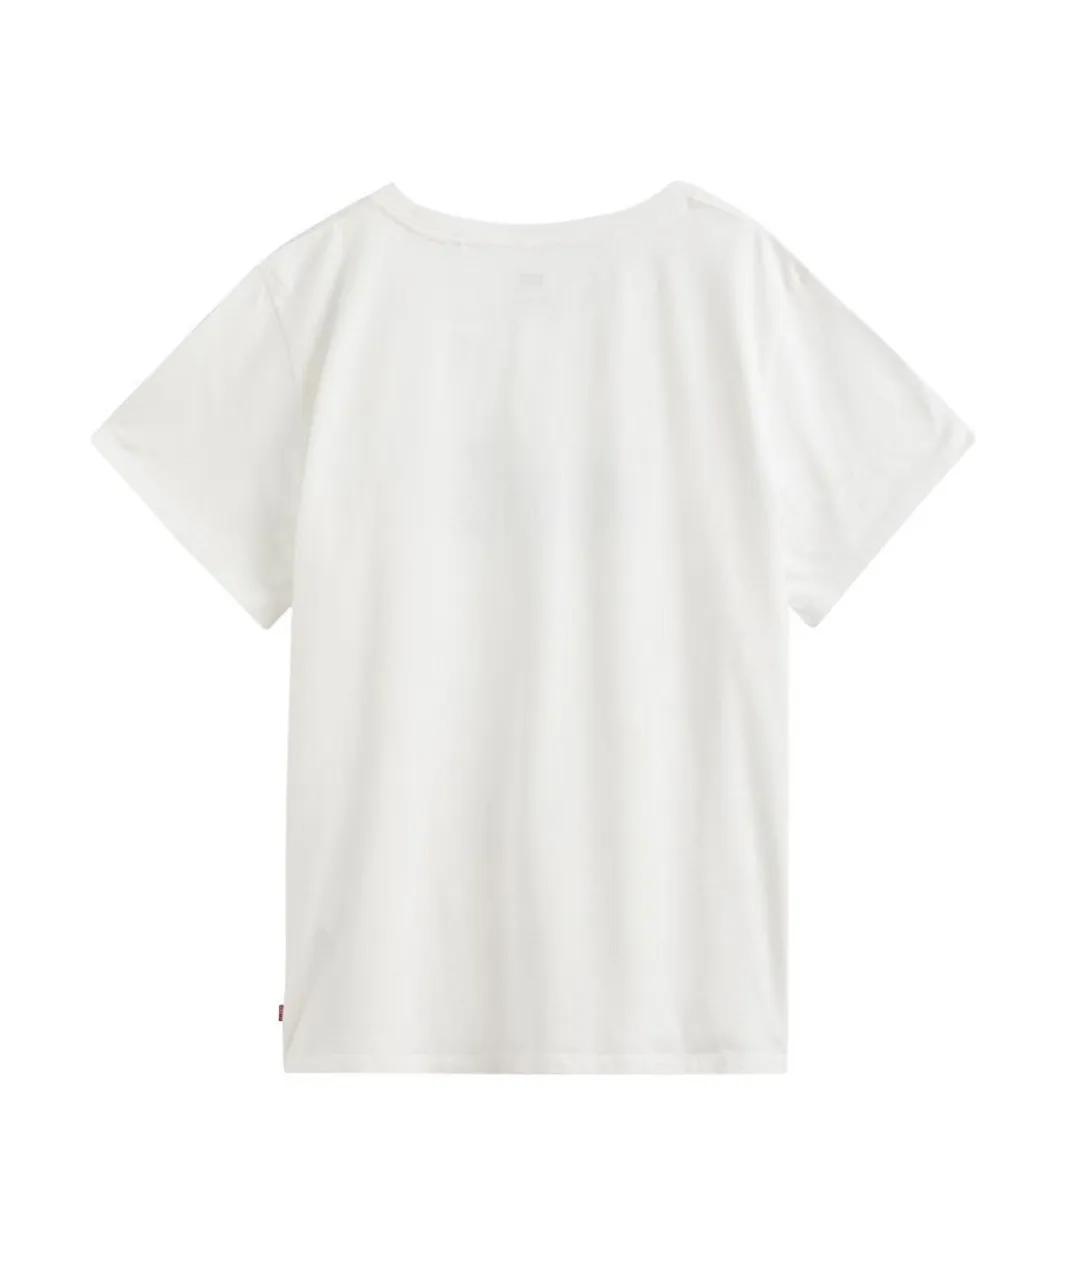 Levi's Womenss Levis Plus Perfect Graphic T-Shirt in White Cotton